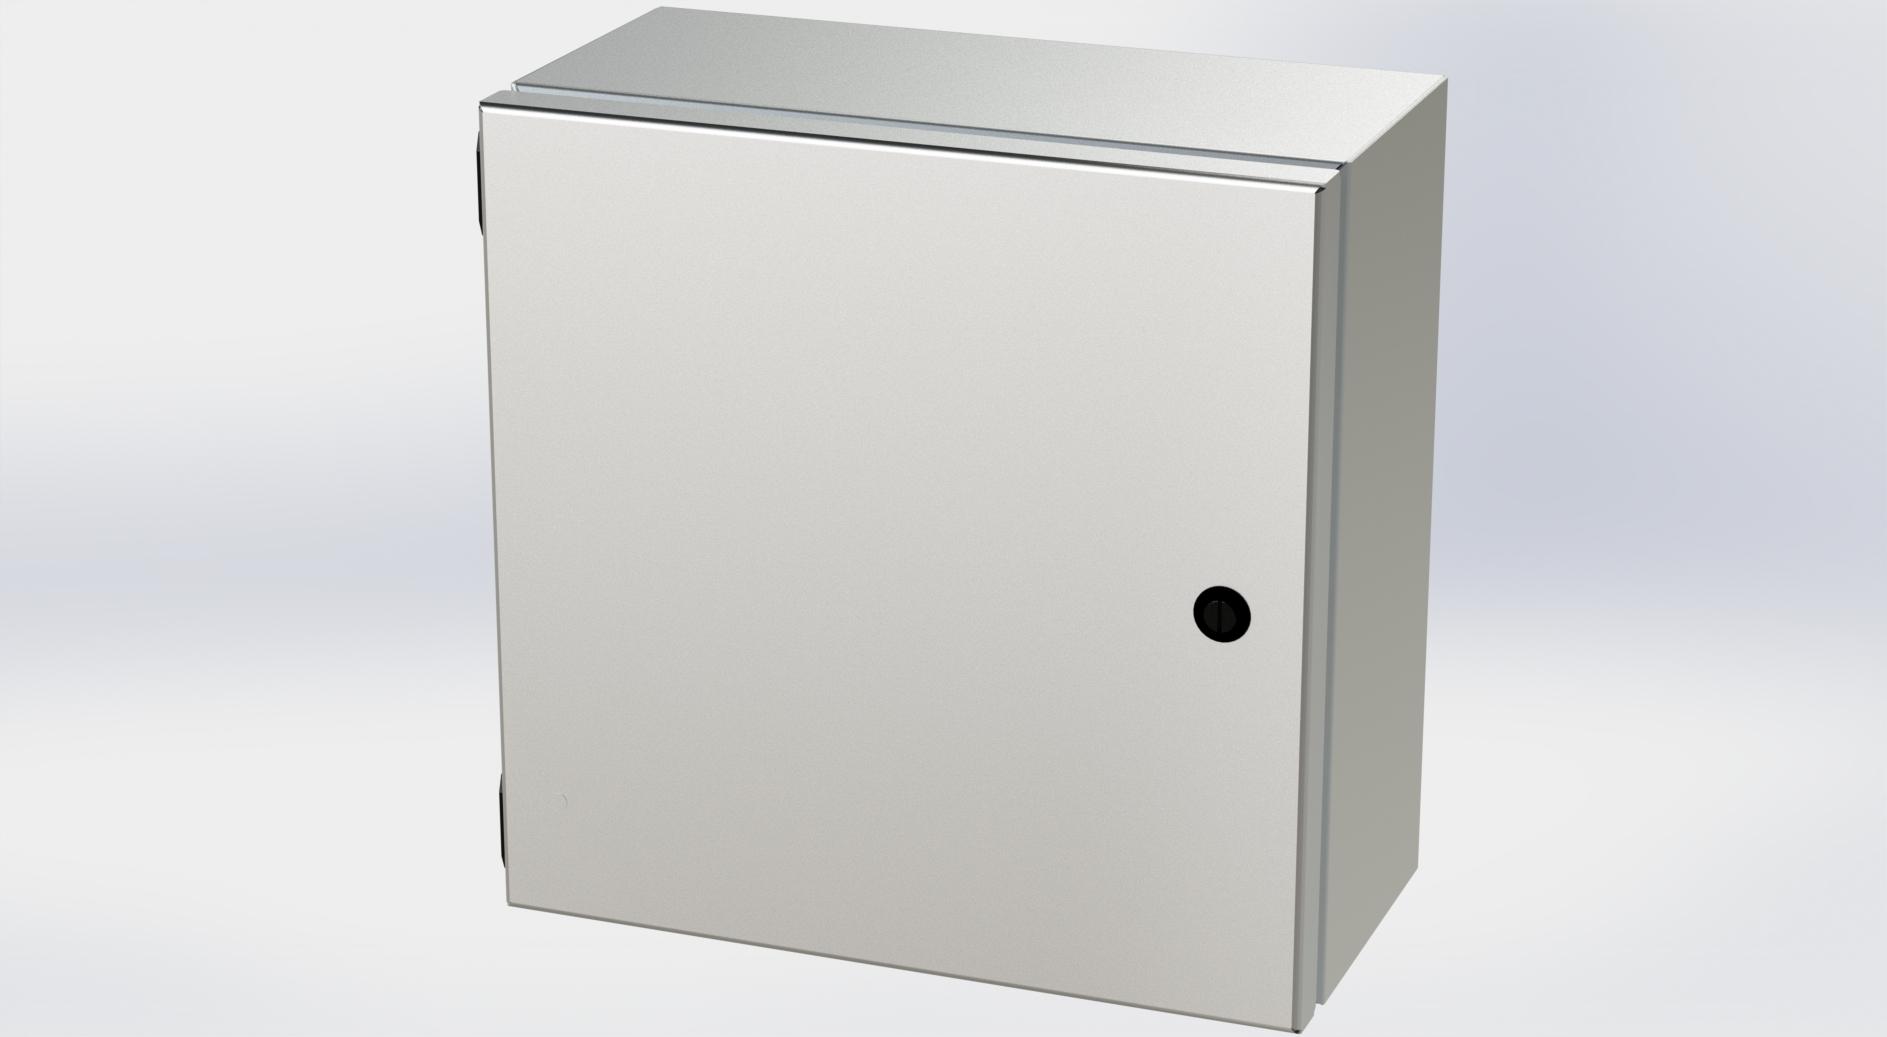 Saginaw Control SCE-1212ELJSS6 S.S. ELJ Enclosure, Height:12.00", Width:12.00", Depth:6.00", #4 brushed finish on all exterior surfaces. Optional sub-panels are powder coated white.